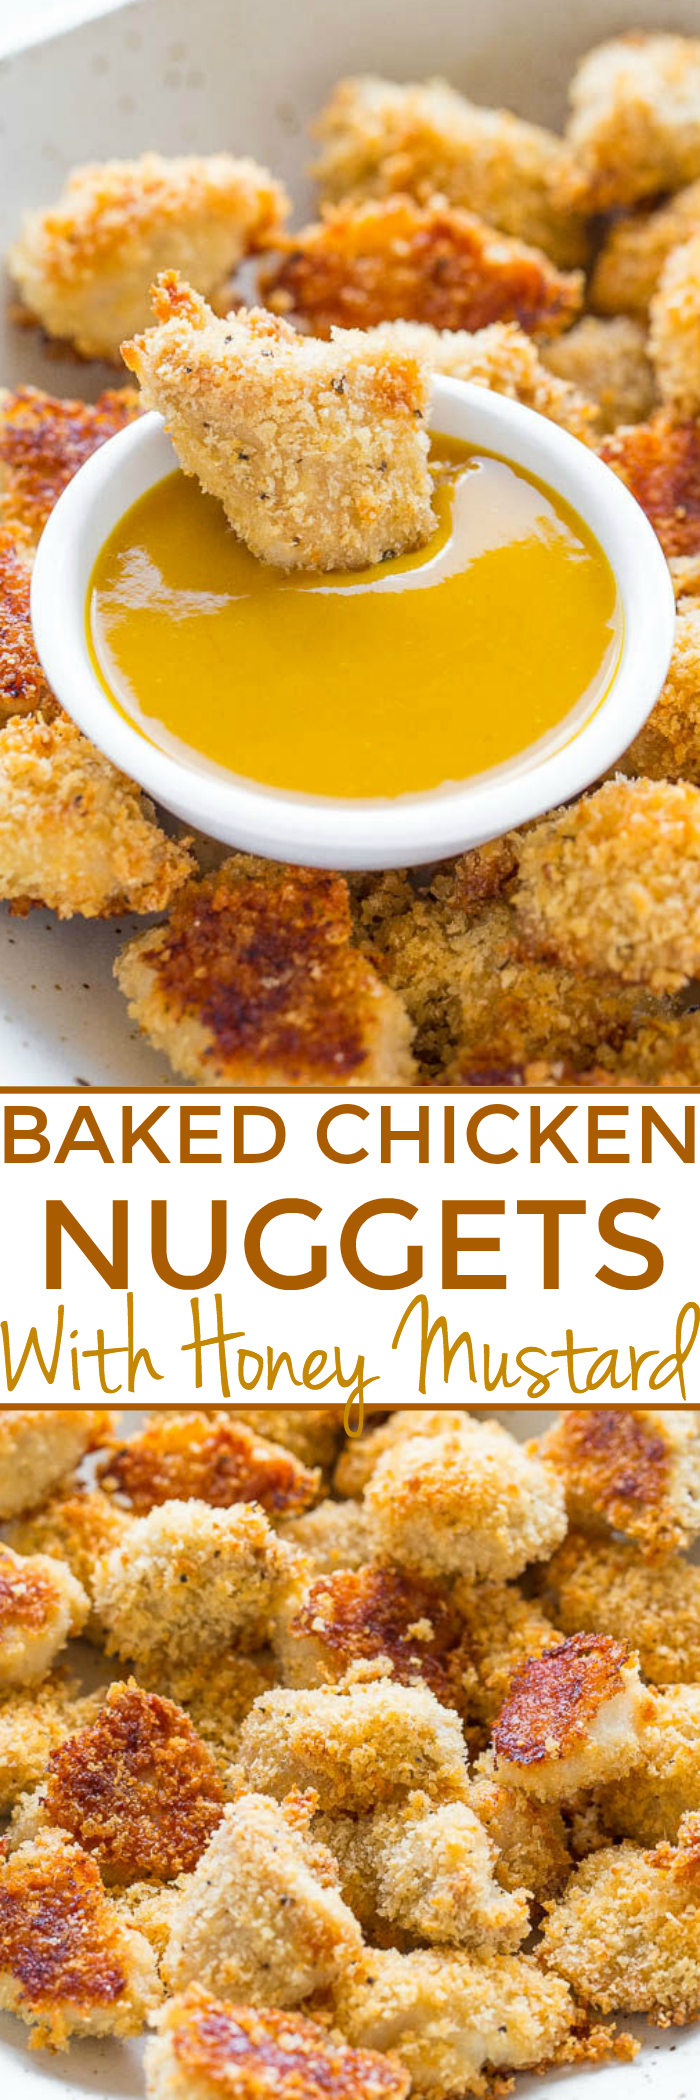 Baked Chicken Nuggets with Honey Mustard - You'll never guess they're BAKED and not fried!! CRISPY on the outside, tender and juicy inside! Goodbye storebought nuggets because homemade are way BETTER!!